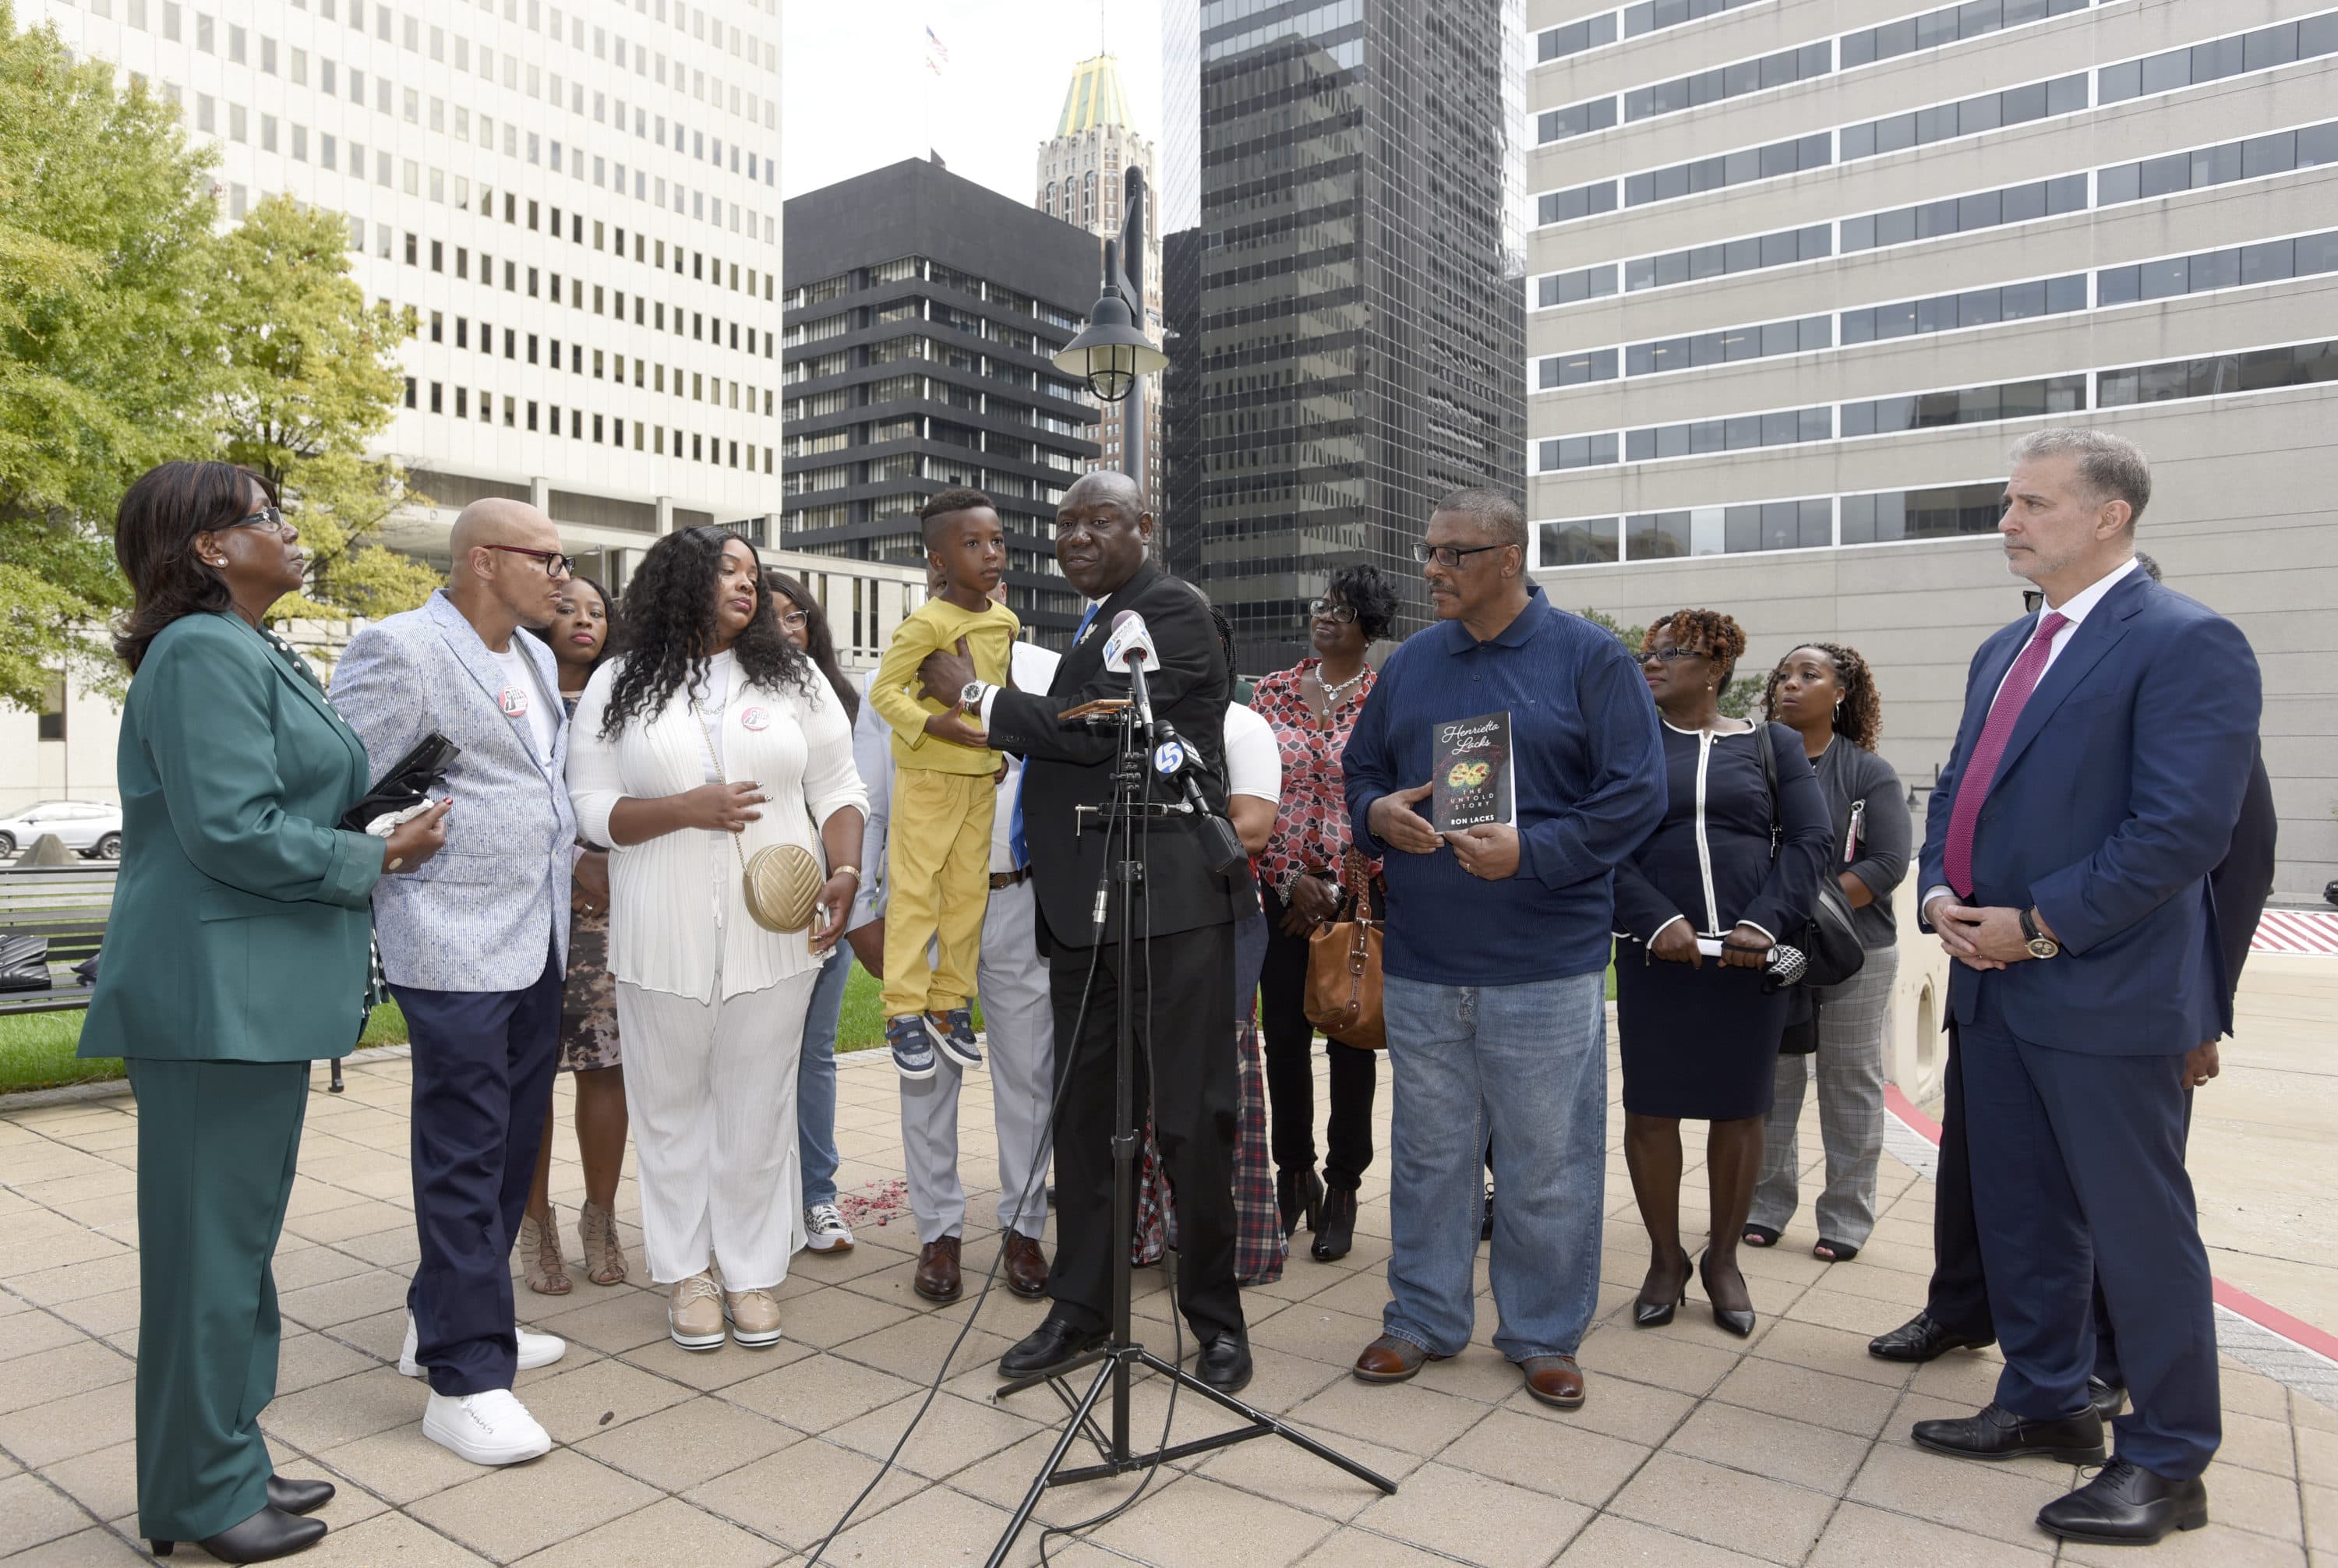 Attorney Ben Crump, center, holds Zayden Joseph, 6, the great-grandson of Henrietta Lacks, while standing with attorneys and other descendants of Lacks, whose cells have been used in medical research without her permission, outside the federal courthouse in Baltimore, Monday, Oct. 4, 2021. (Steve Ruark/AP)